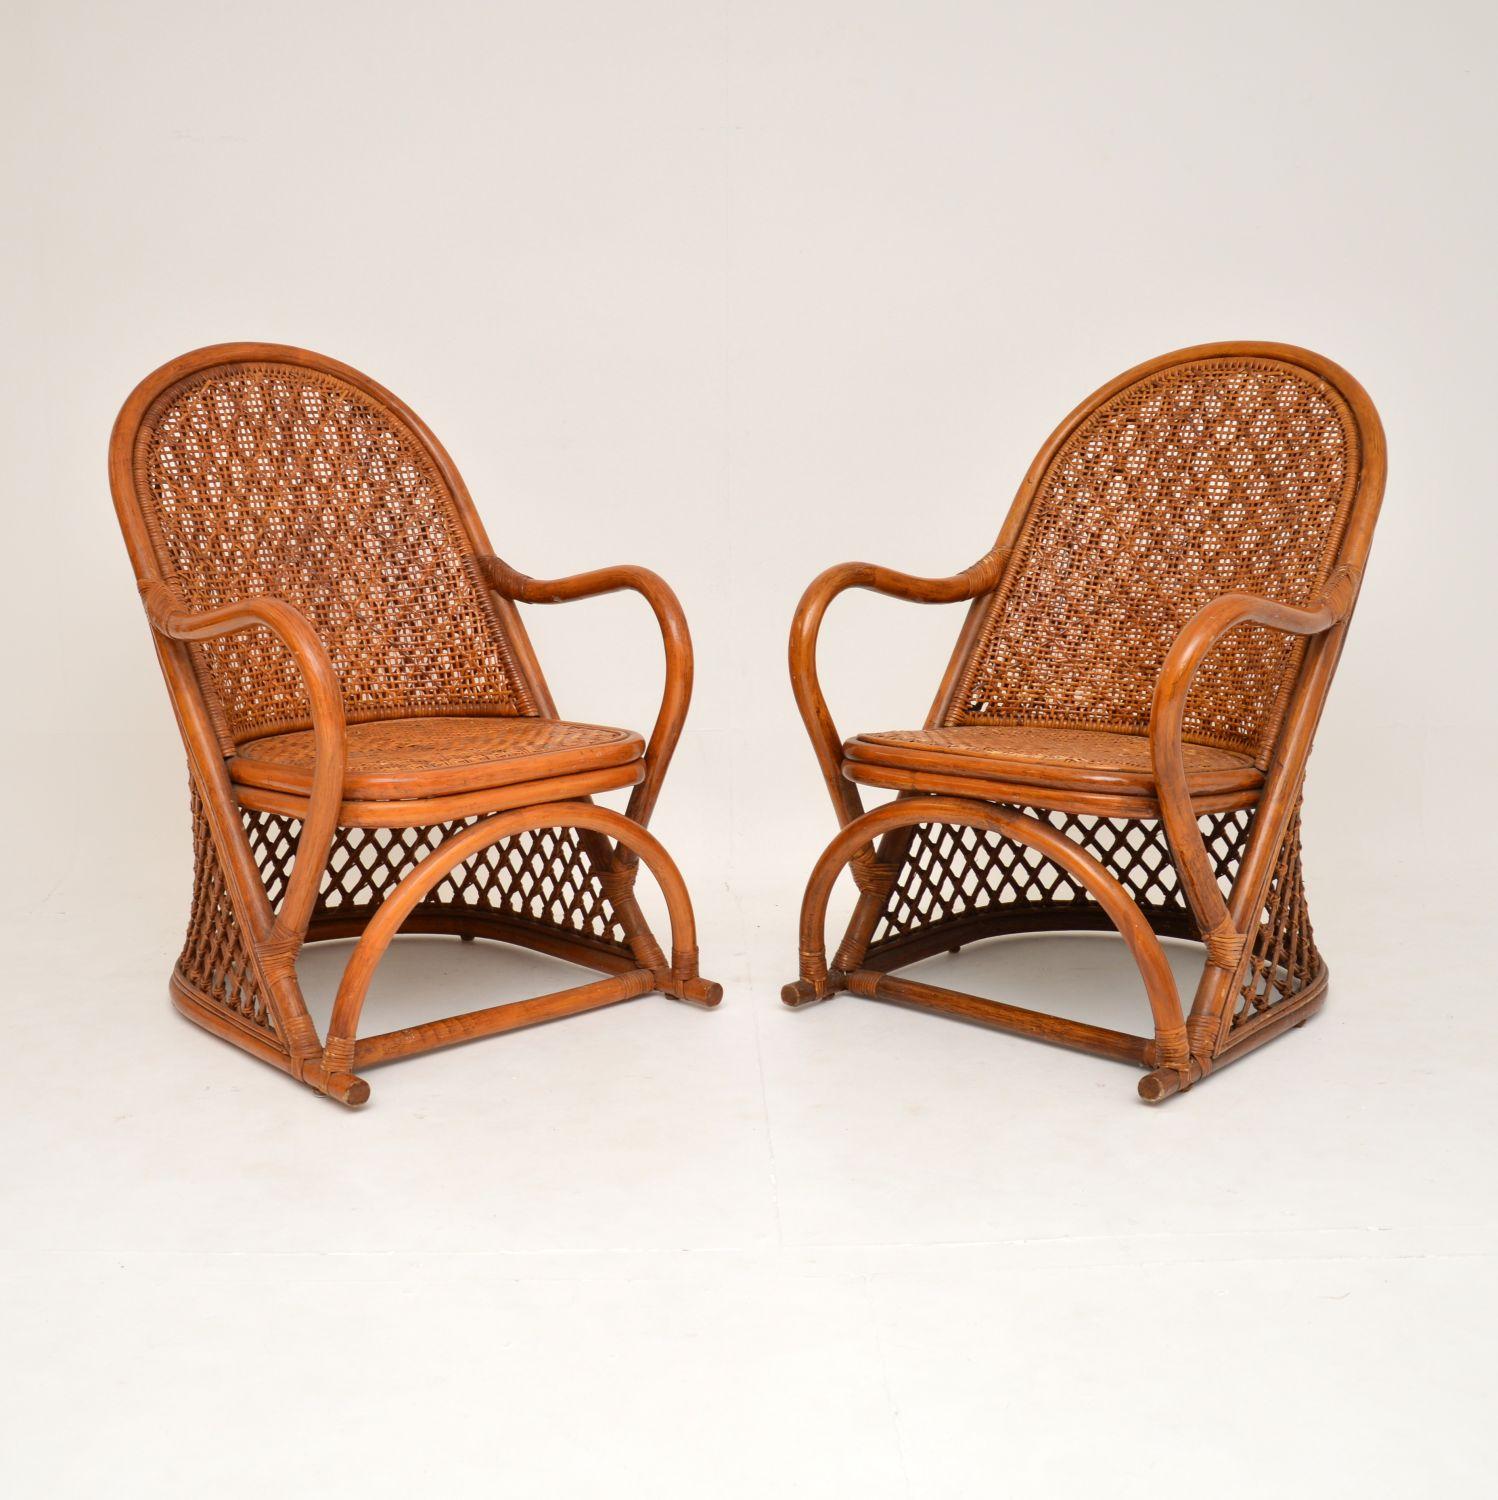 A stylish and very well 1970’s vintage bamboo & rattan pair of armchairs, coffee & side table, which were made in England.

The set consists of a beautiful and very comfortable pair of armchairs, large circular coffee table and smaller side